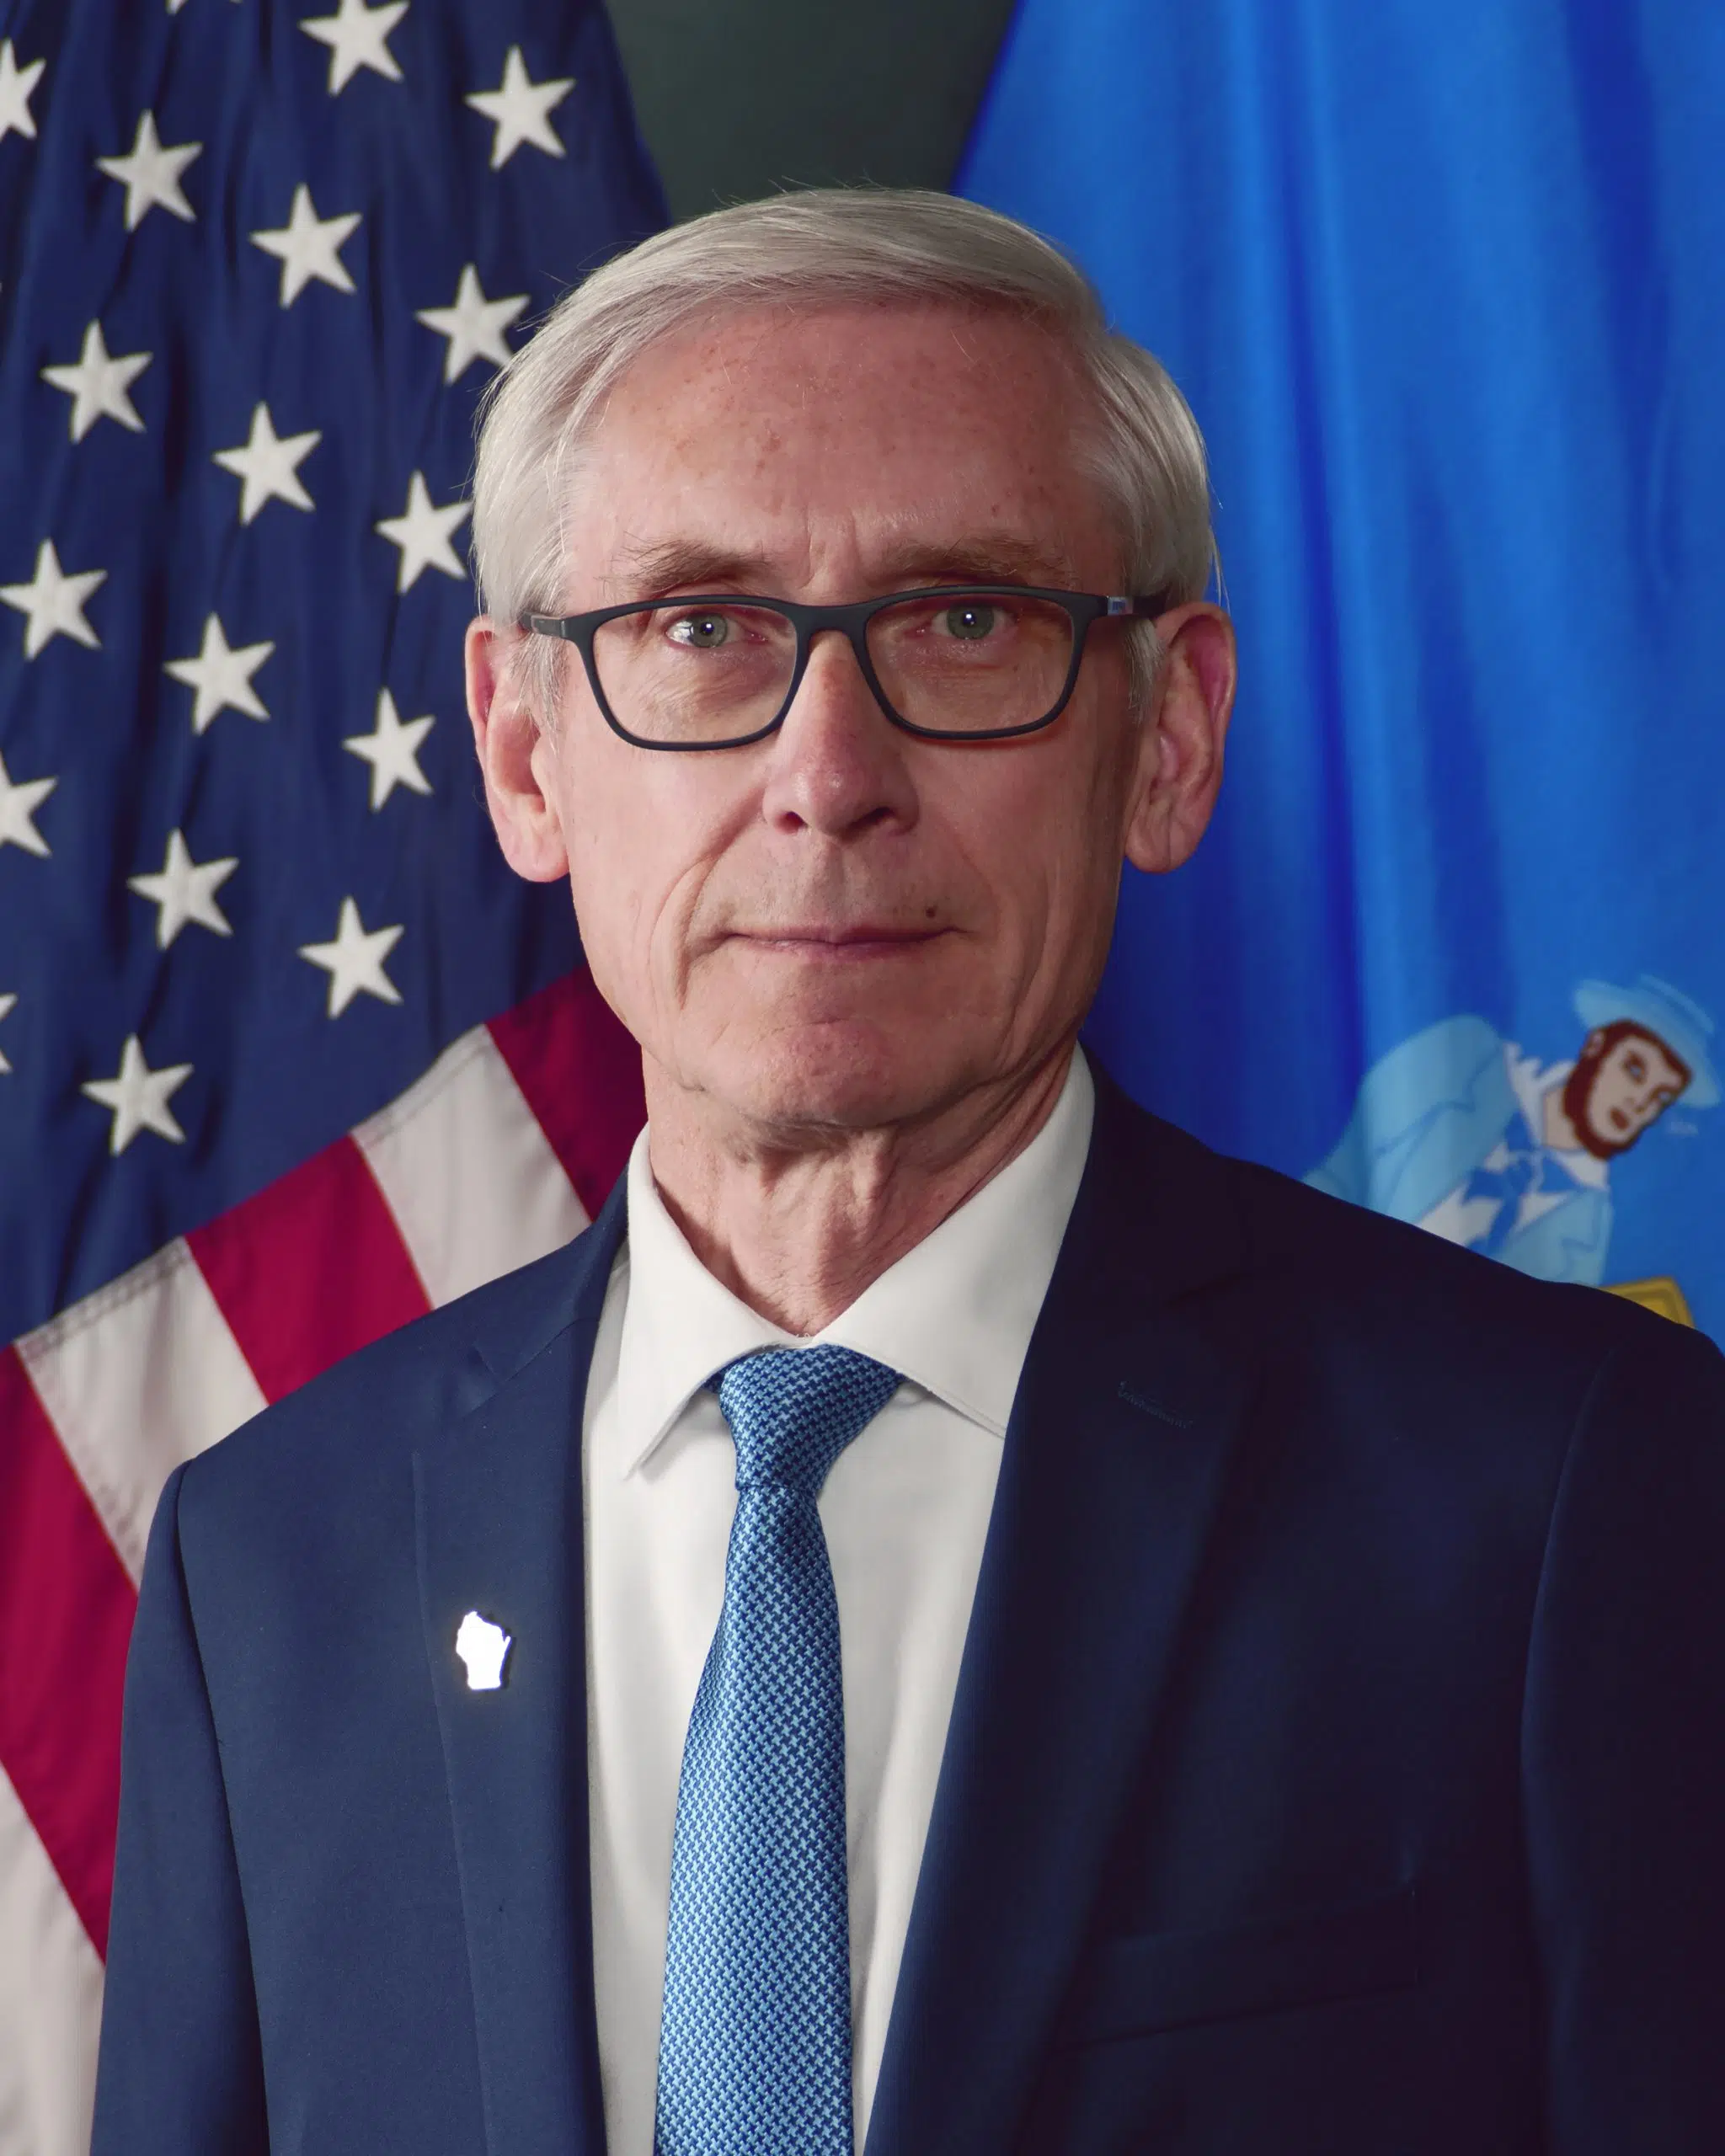 Governor Evers Addresses Inflation While at LTC